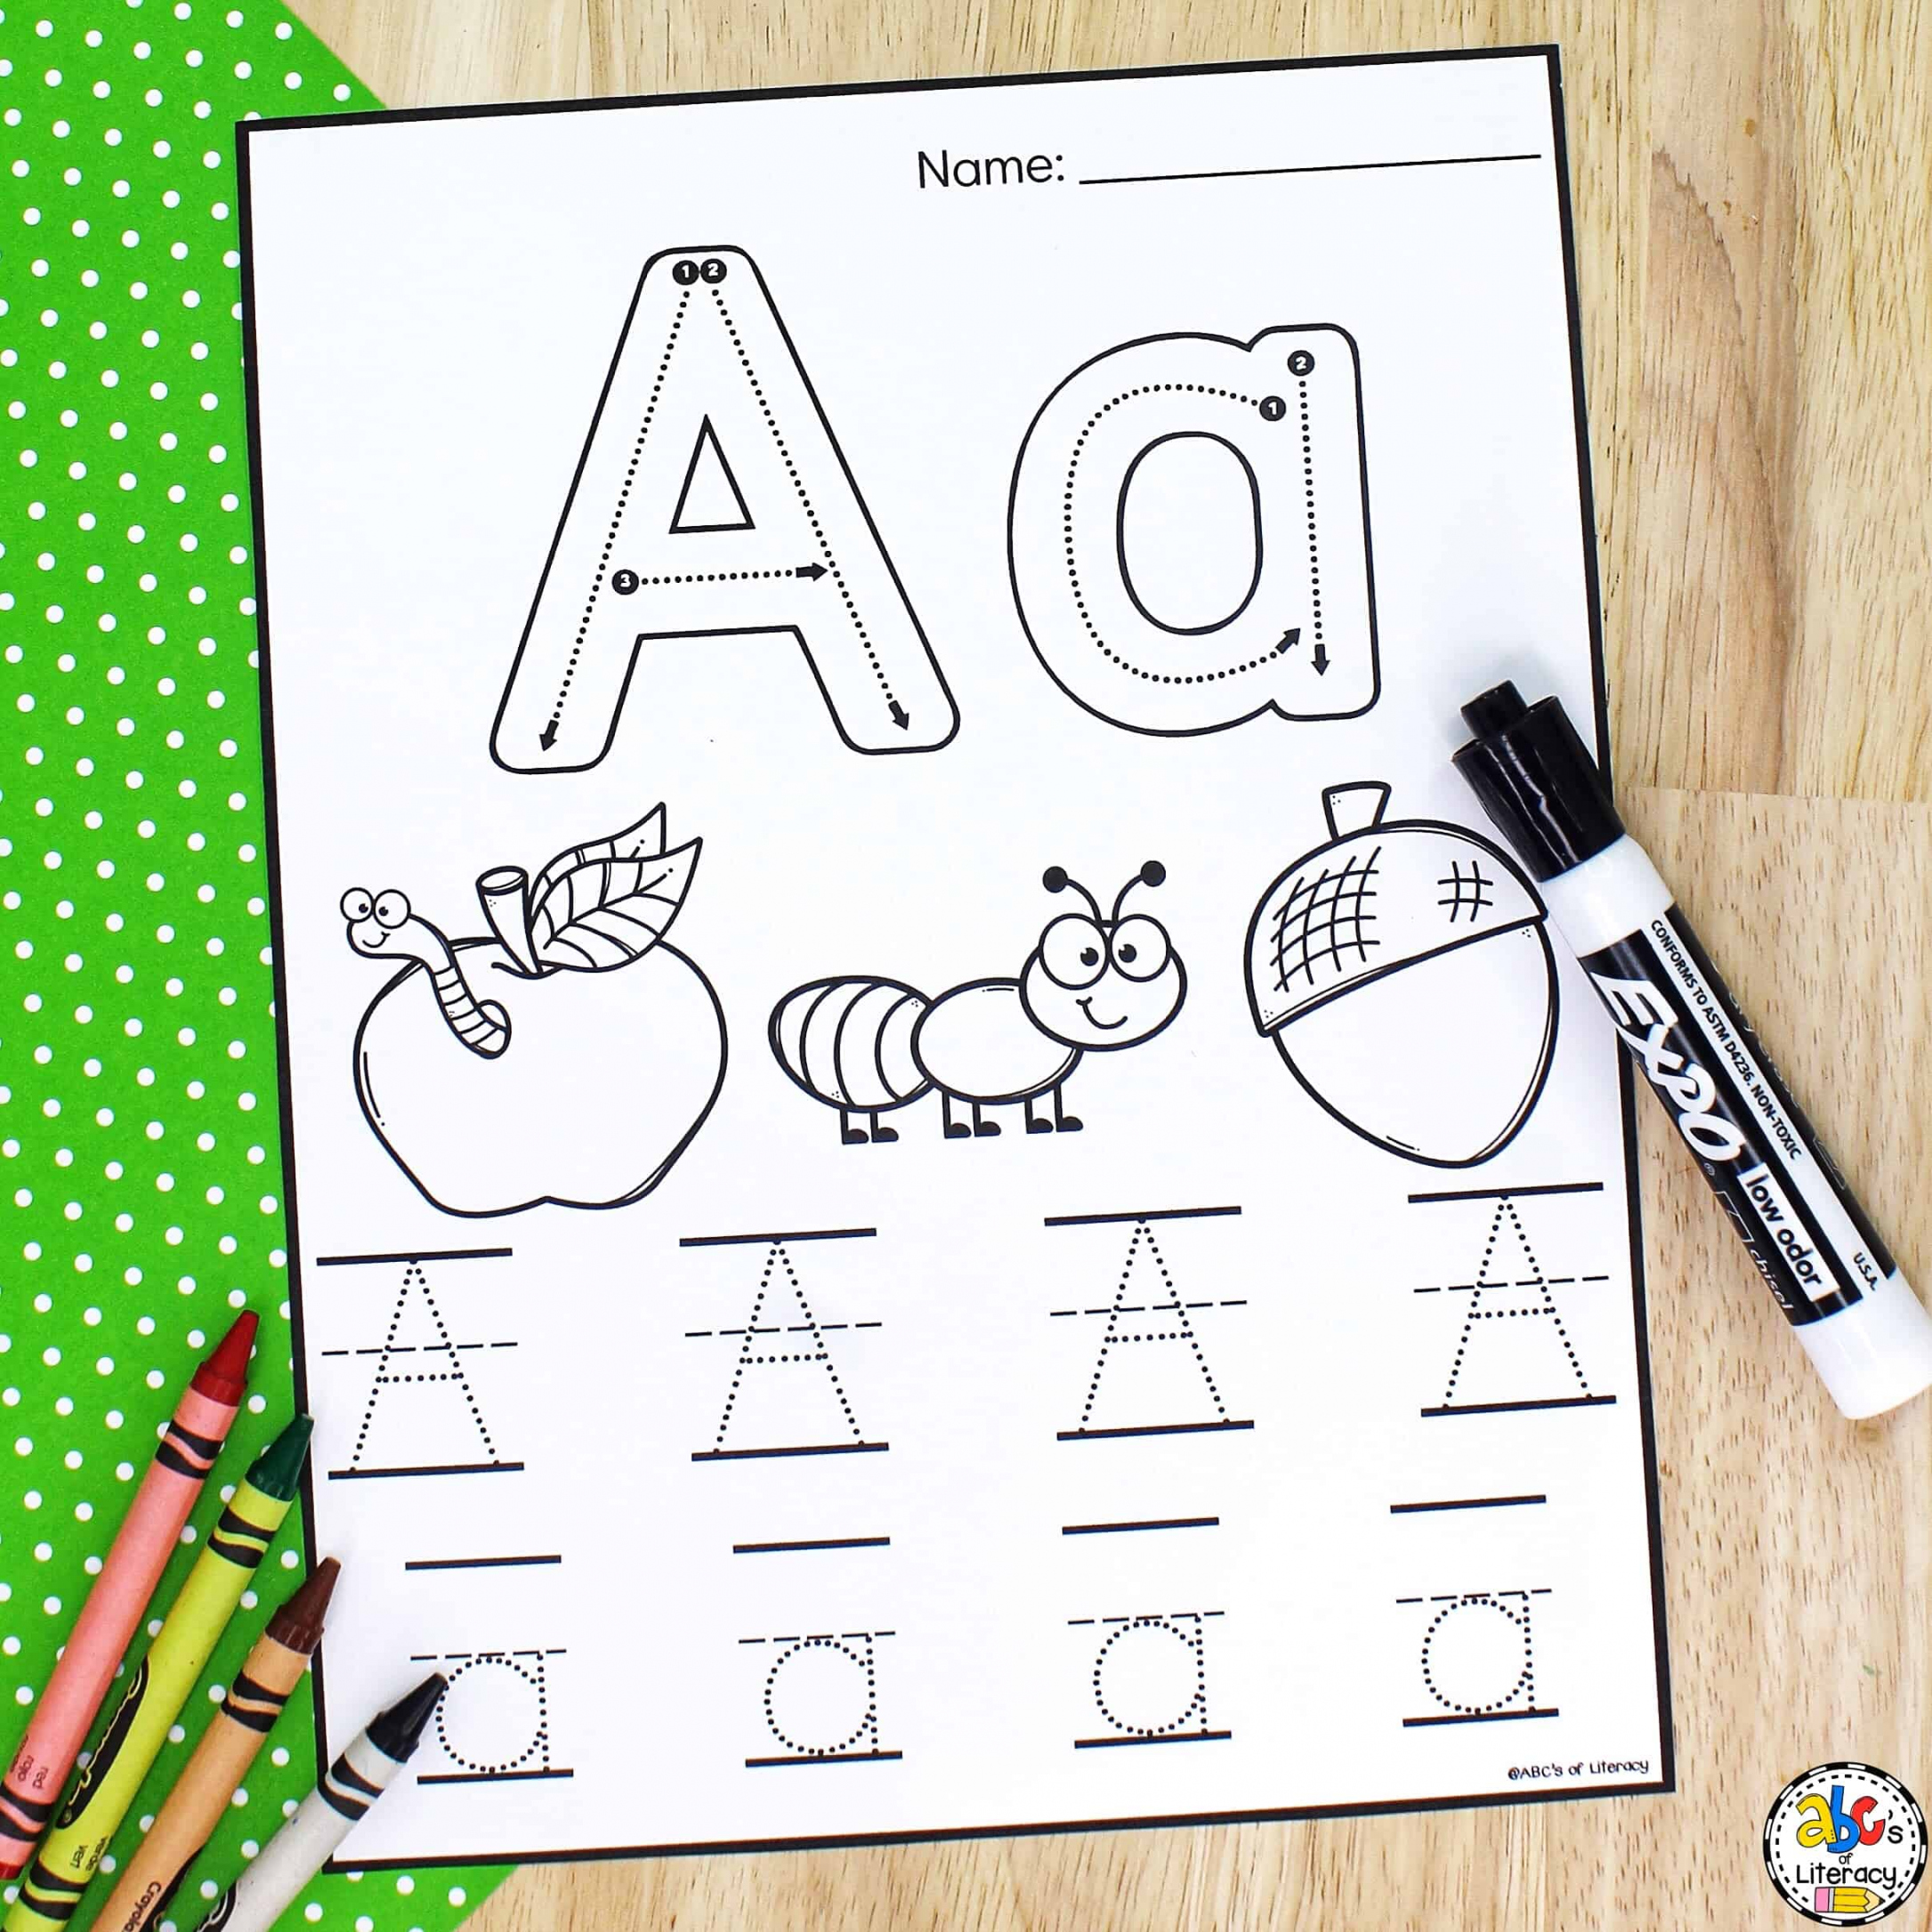 Letter Tracing Worksheets: Free Printable Preschool Worksheets - FREE Printables - Free Printable Preschool Worksheets Tracing Letters